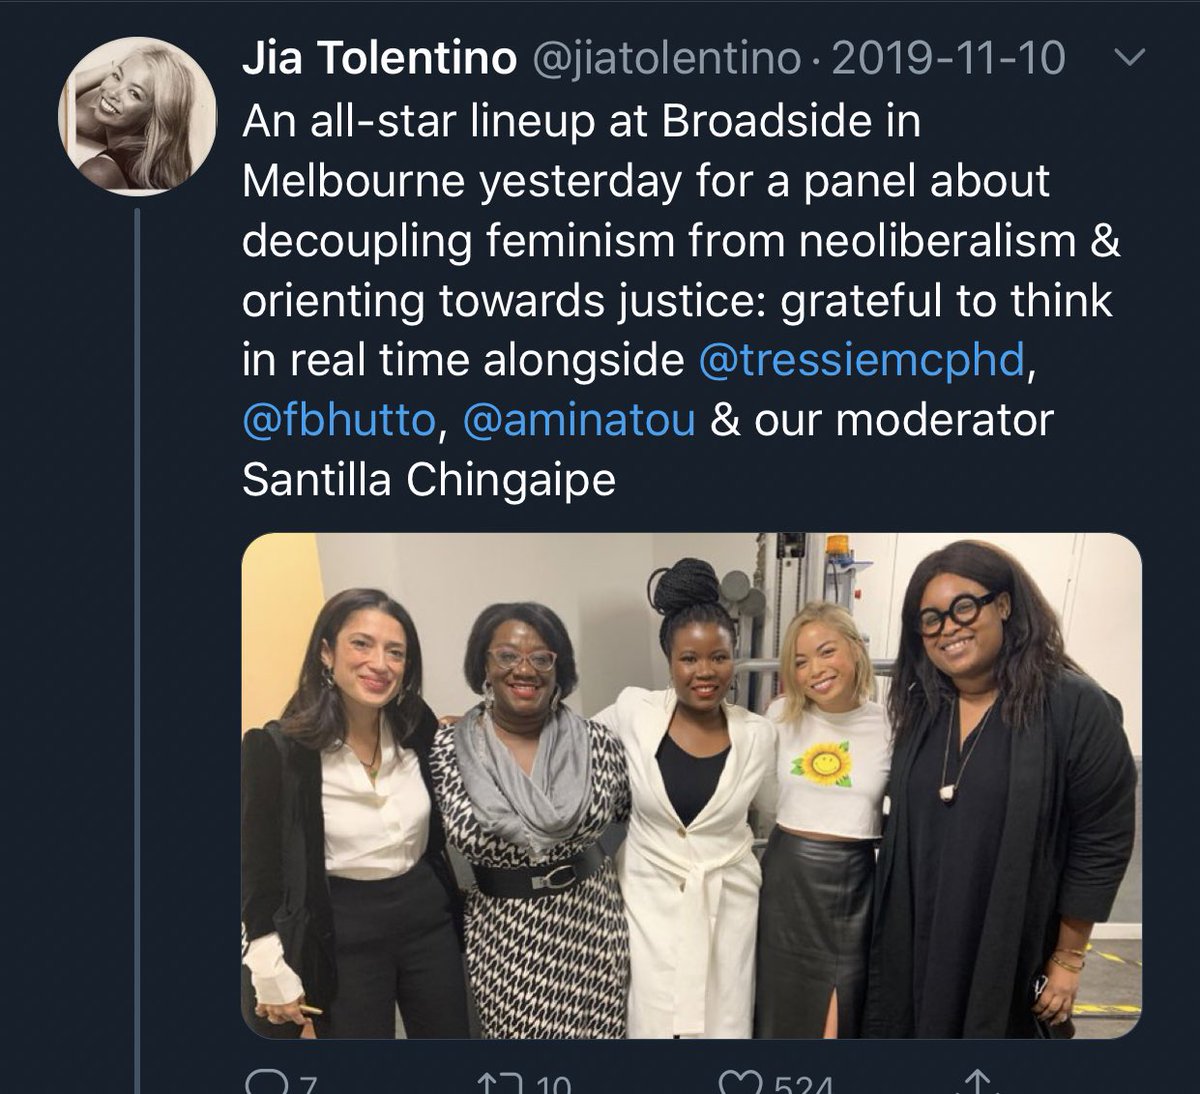 Daughter of family that were feudal lords three generations ago, friend of Aminata and Jia, also does panels about feminism under capitalism while living on family wealth.